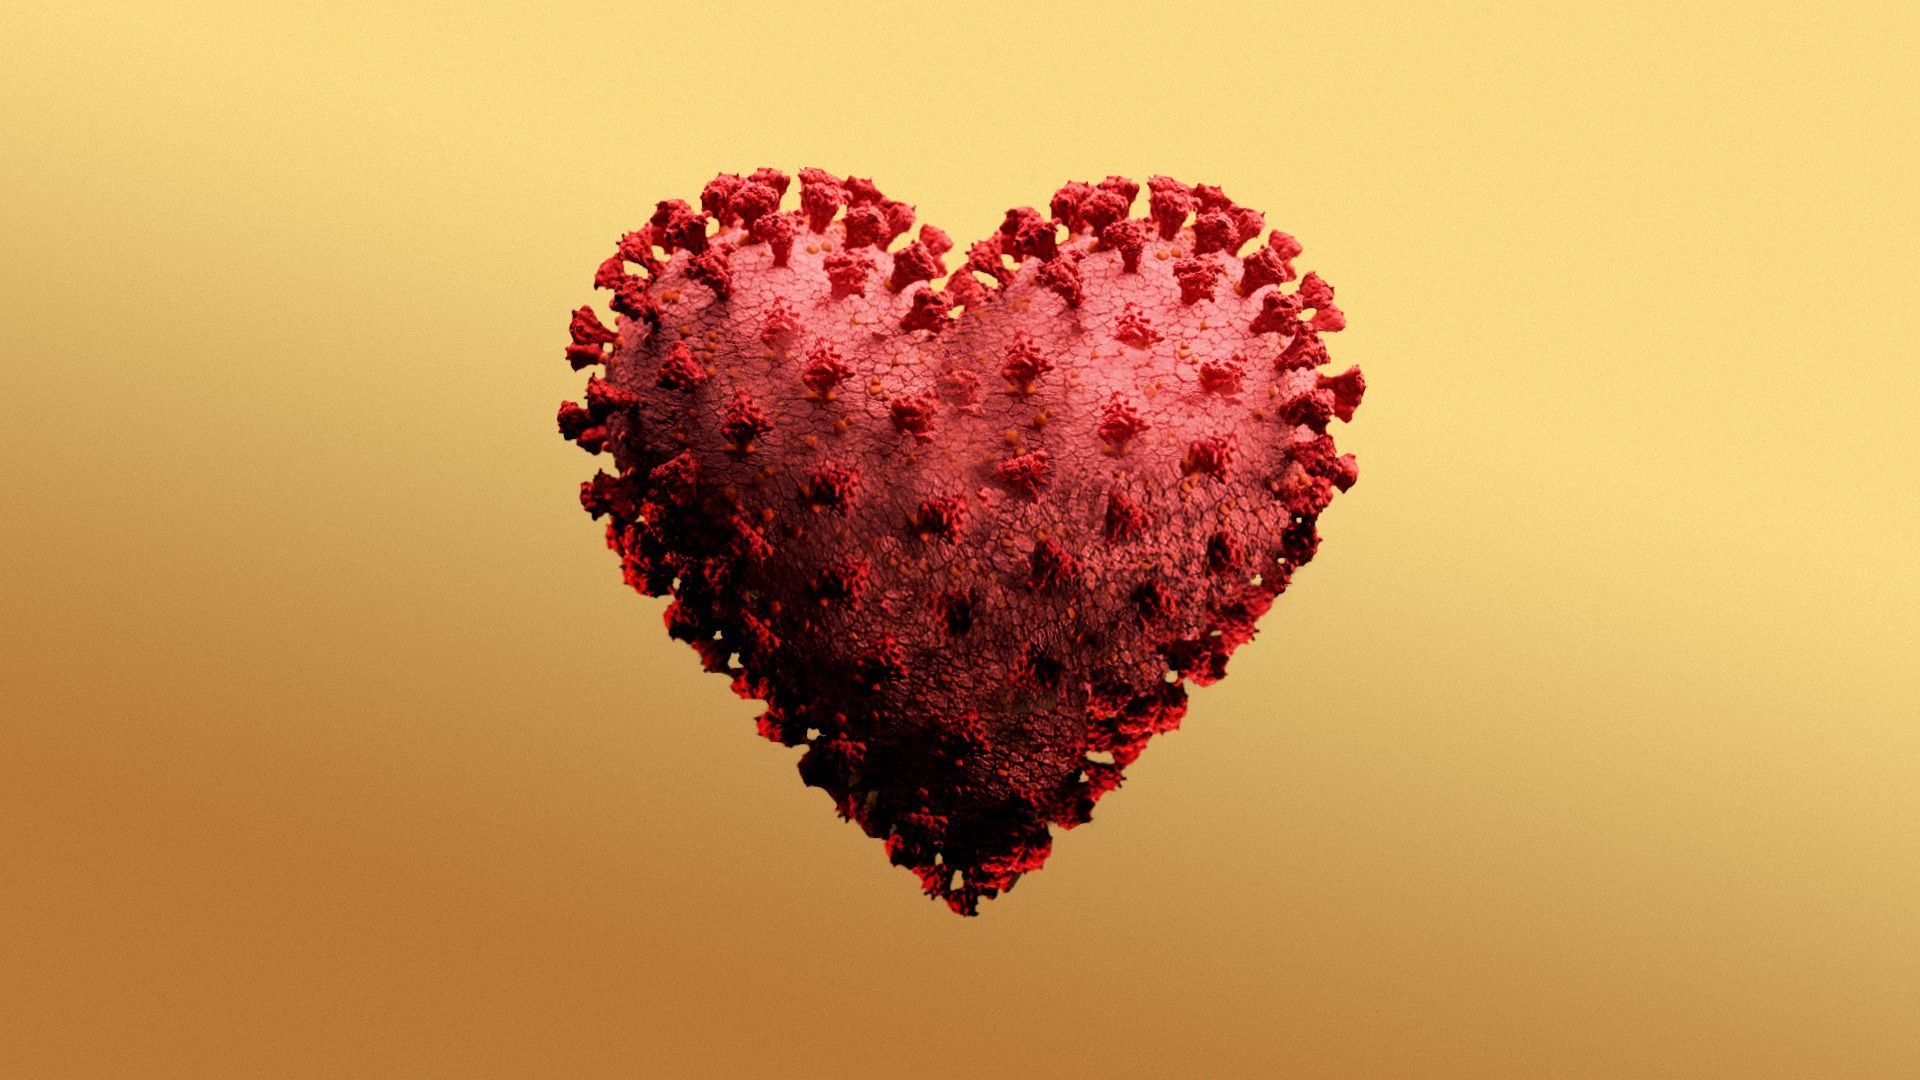 Illustration of a Coronavirus cell in the shape of a heart symbol.